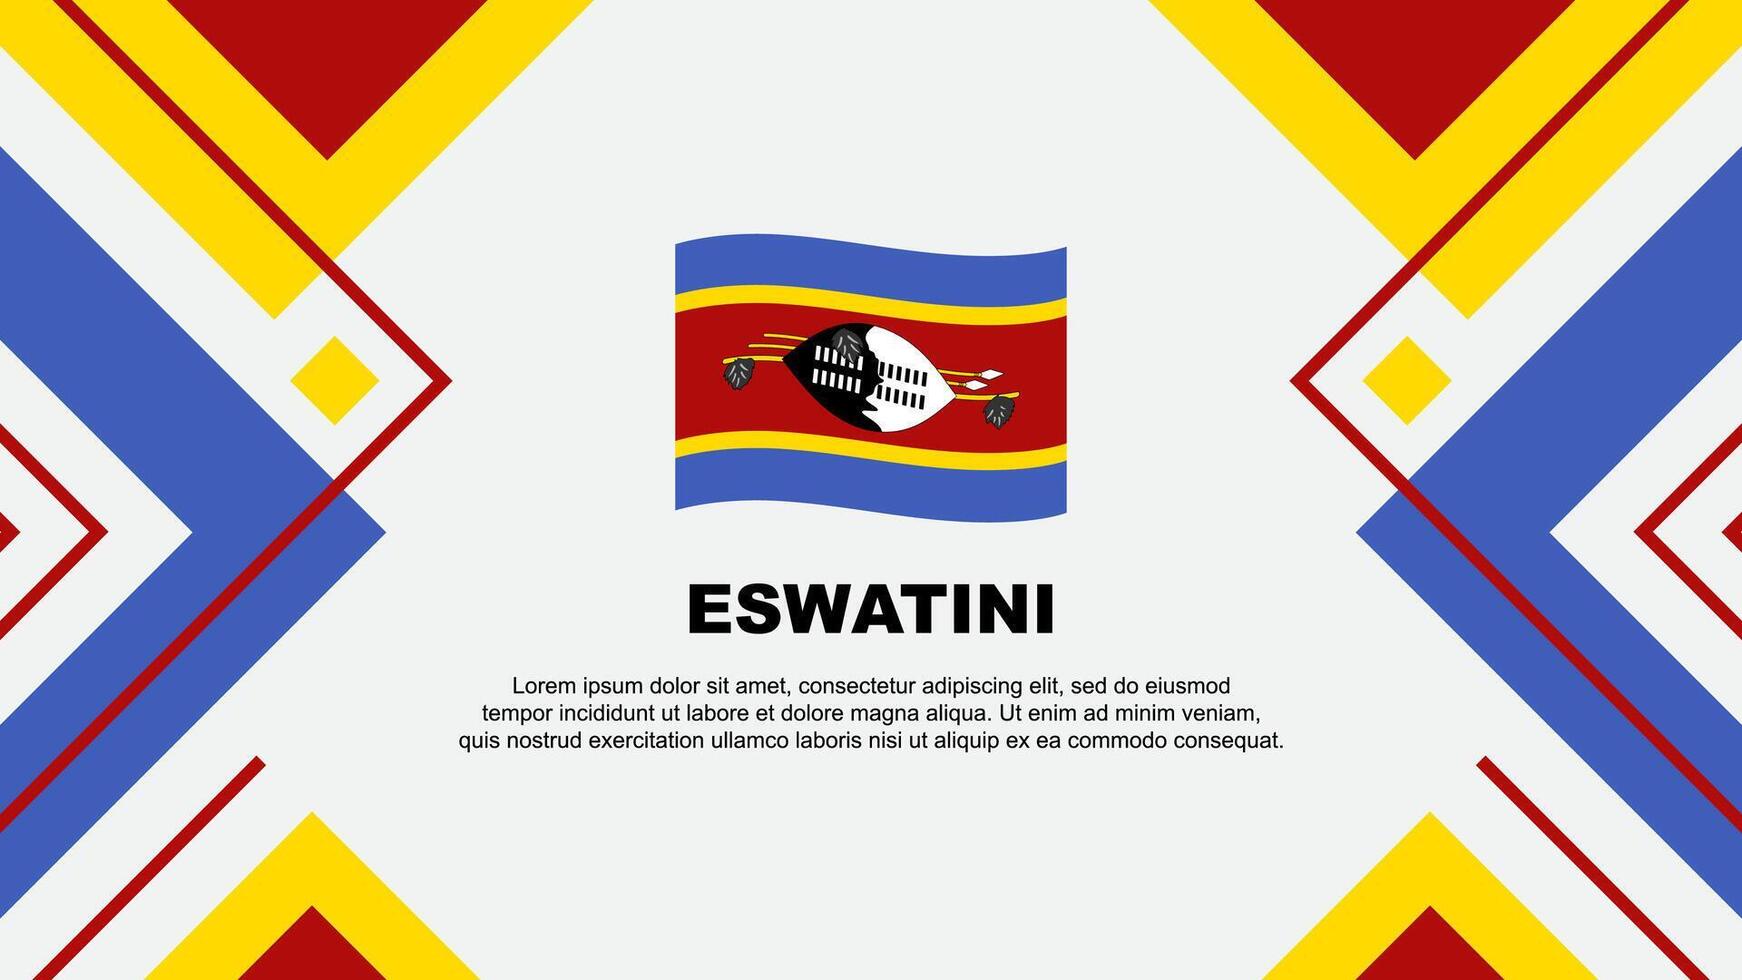 Eswatini Flag Abstract Background Design Template. Eswatini Independence Day Banner Wallpaper Vector Illustration. Eswatini Illustration